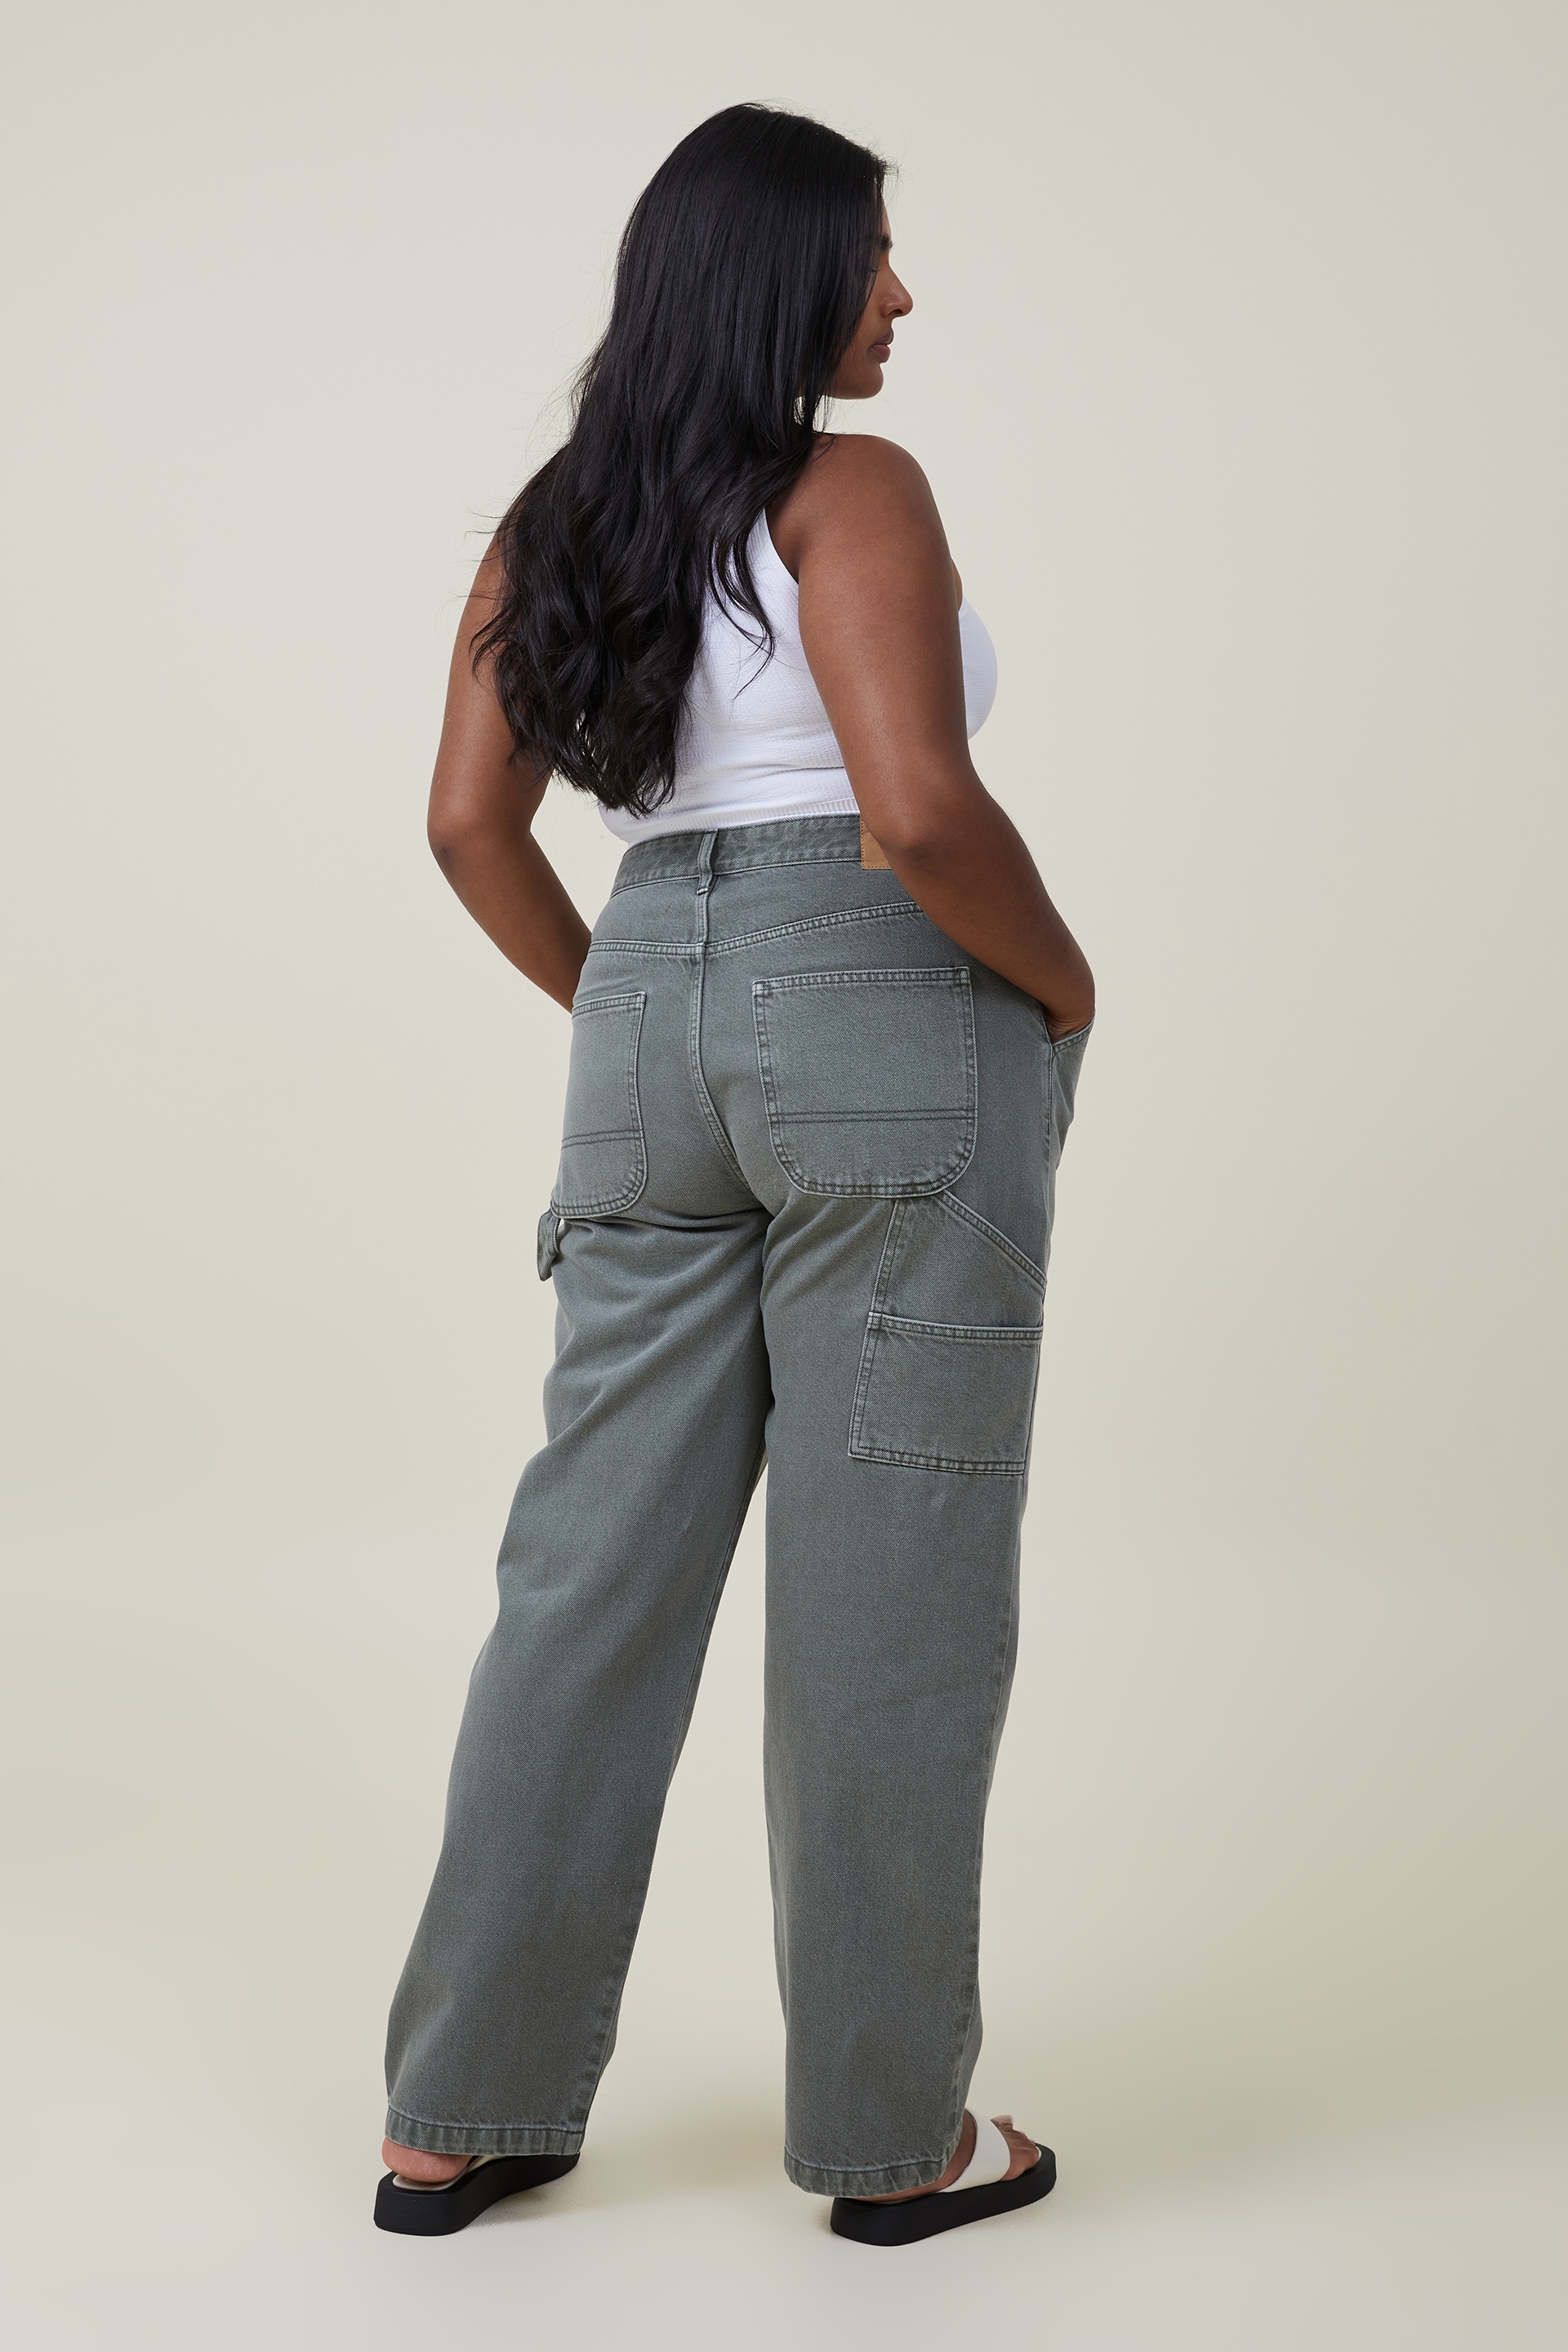 WALSALES High and Thin Loose Womens Pants Plus Size Jeans India | Ubuy